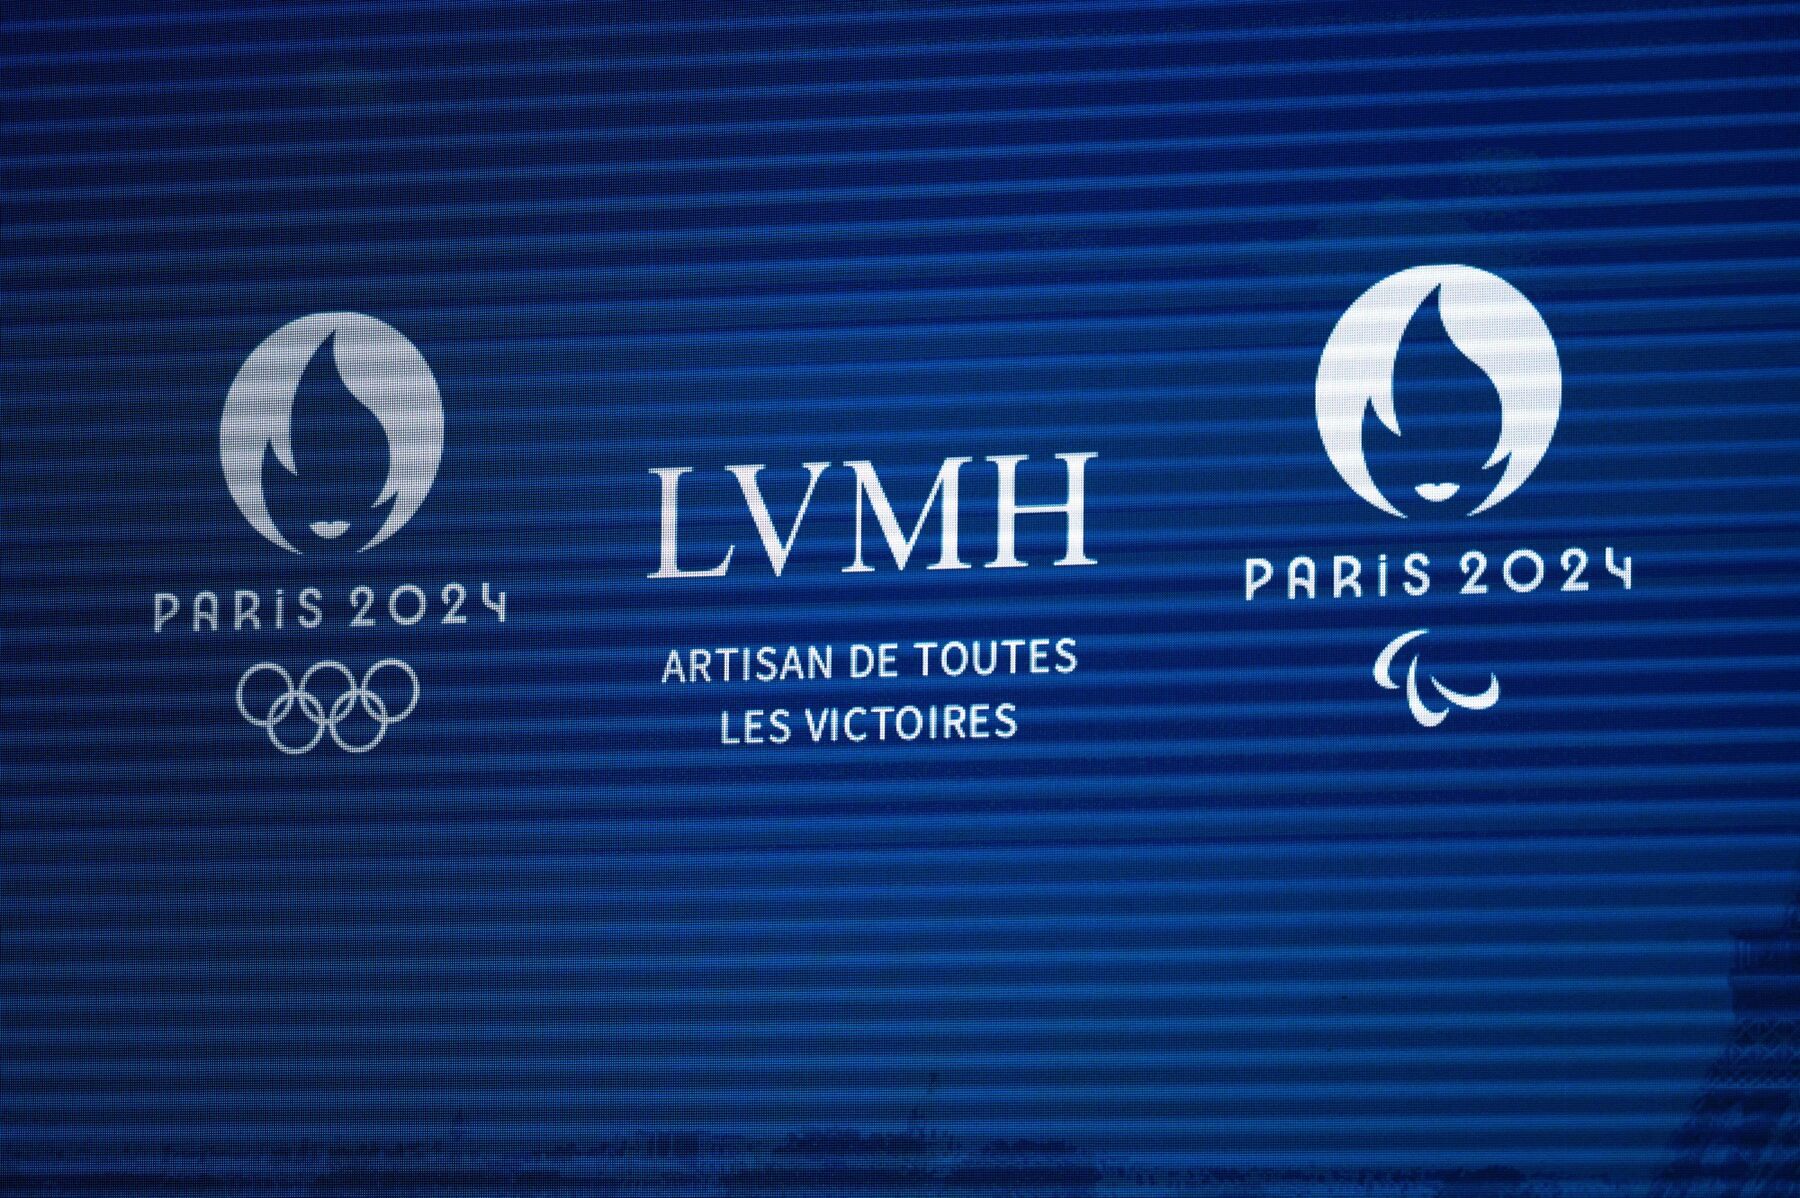 Paris 2024 Olympics LVMH to Sponsor Olympics in a First for Luxury